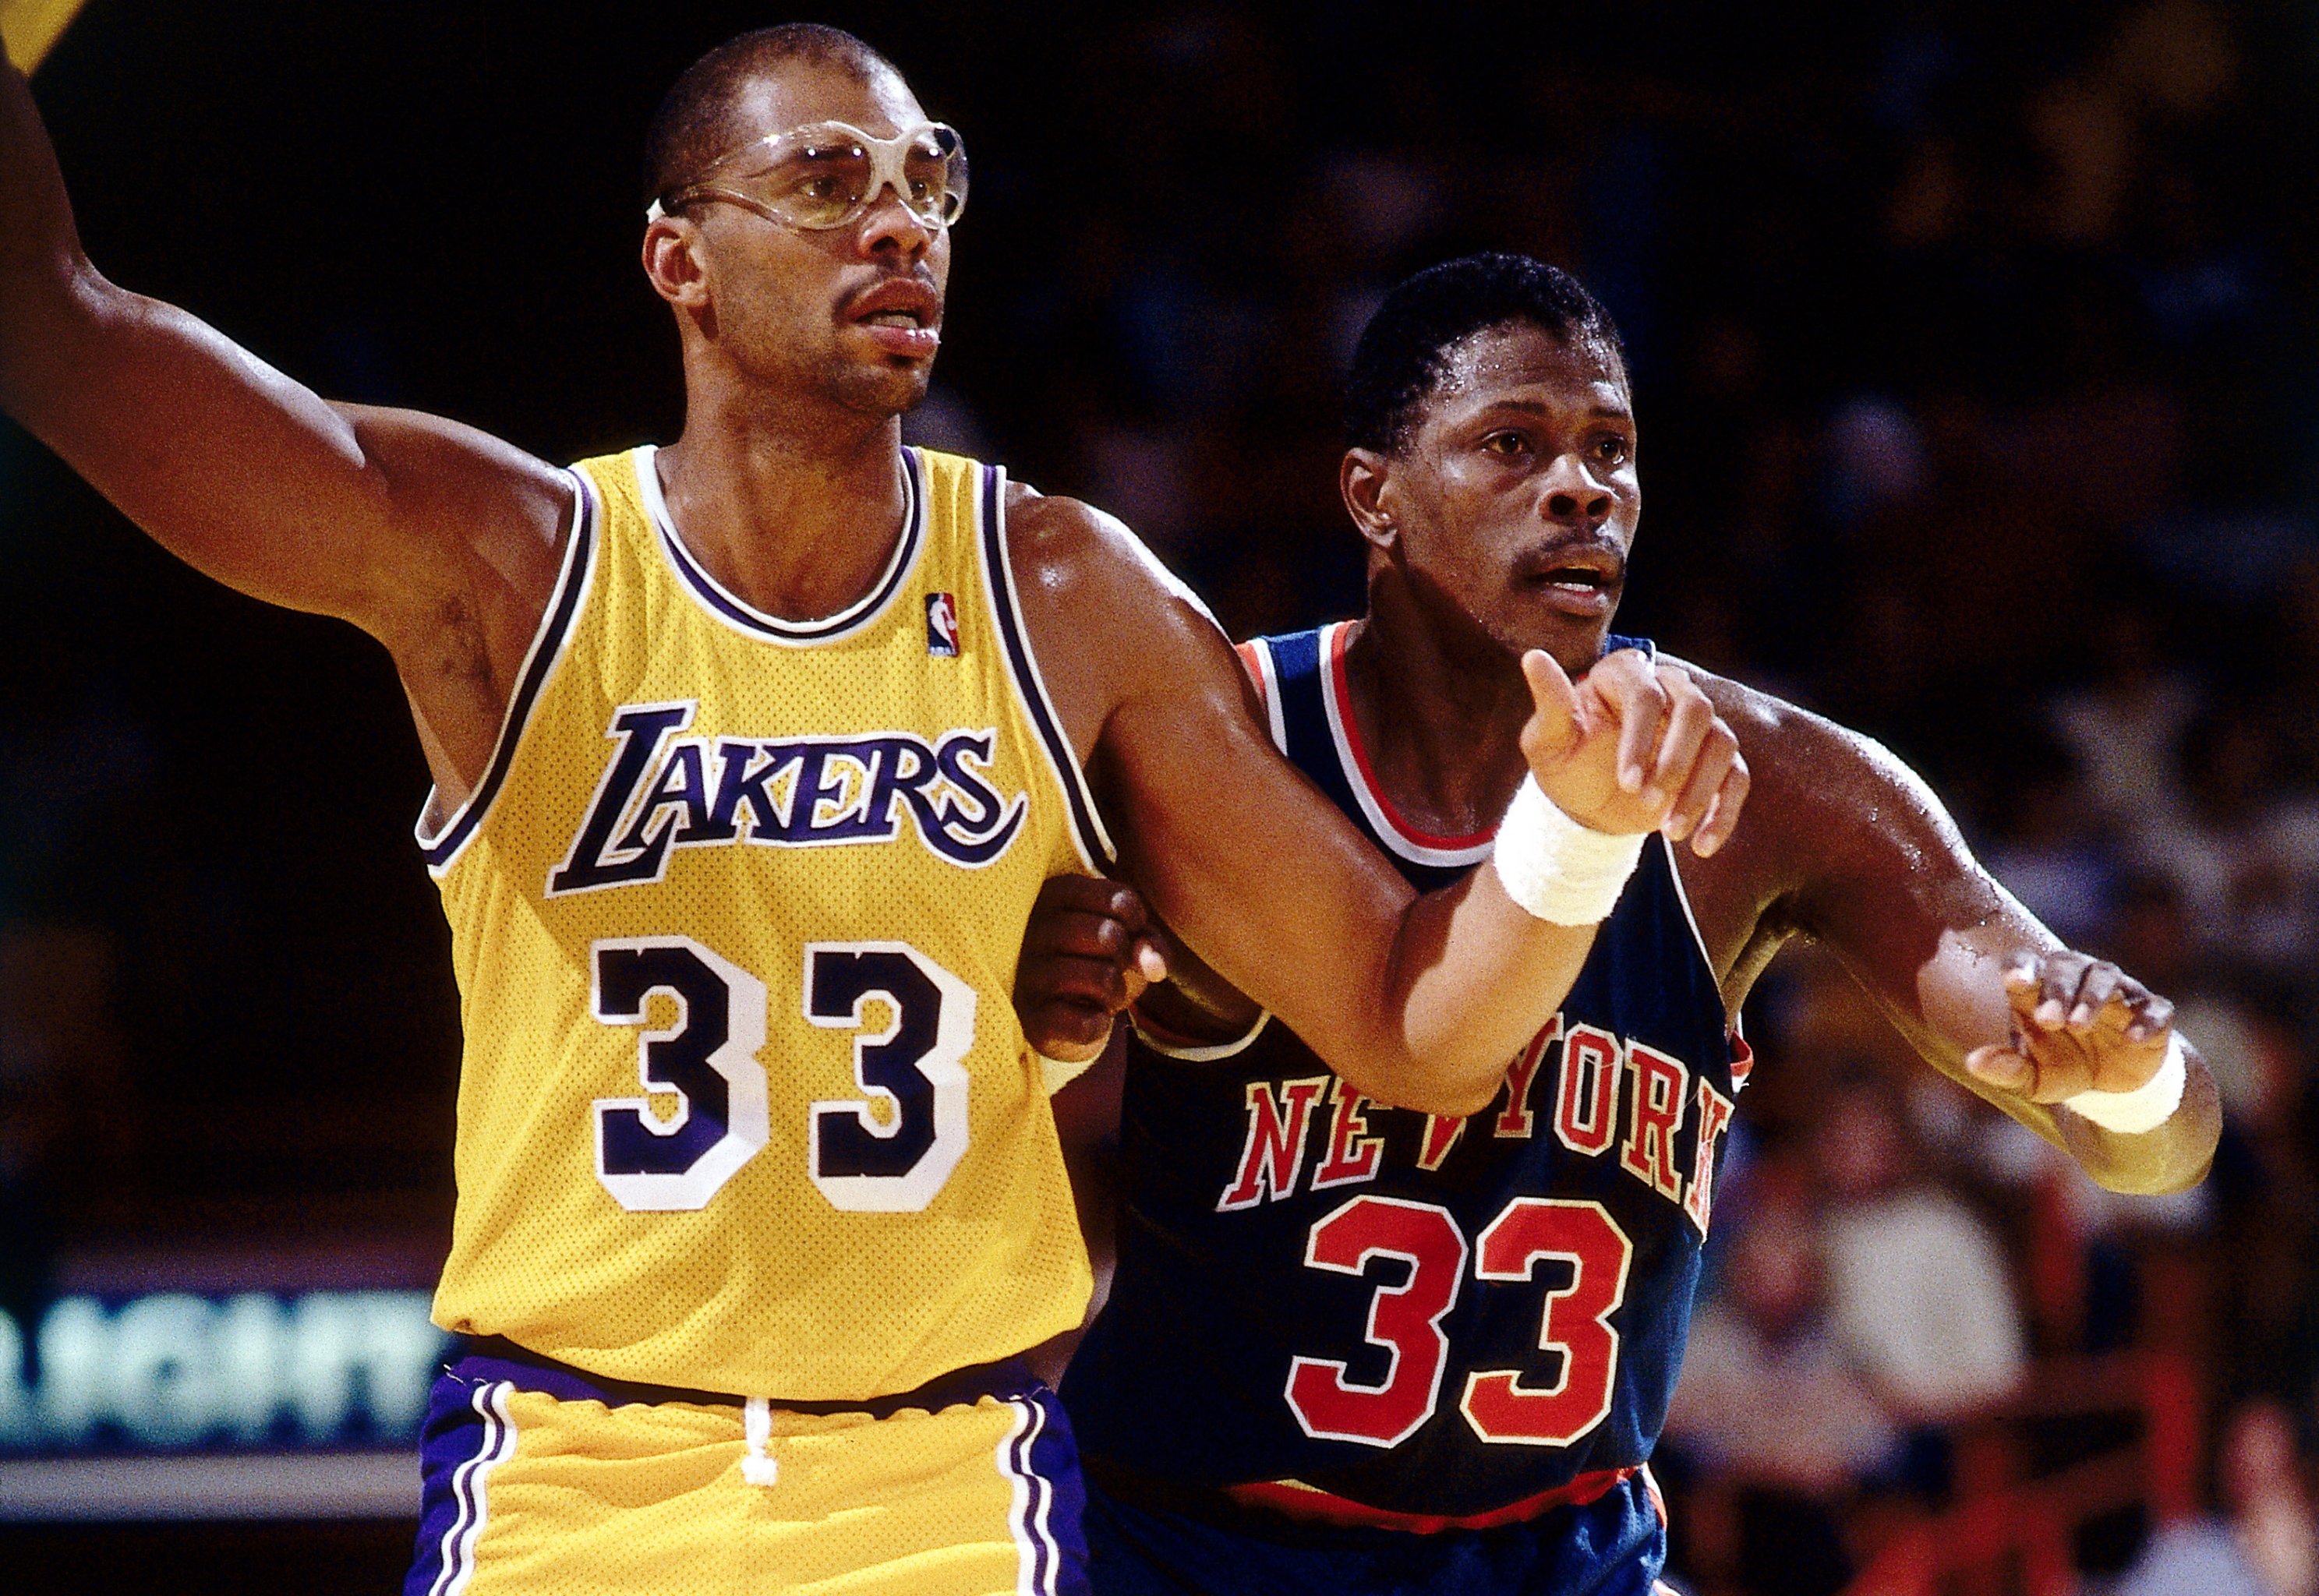 NBA Countdown: Who wore No. 1 best?